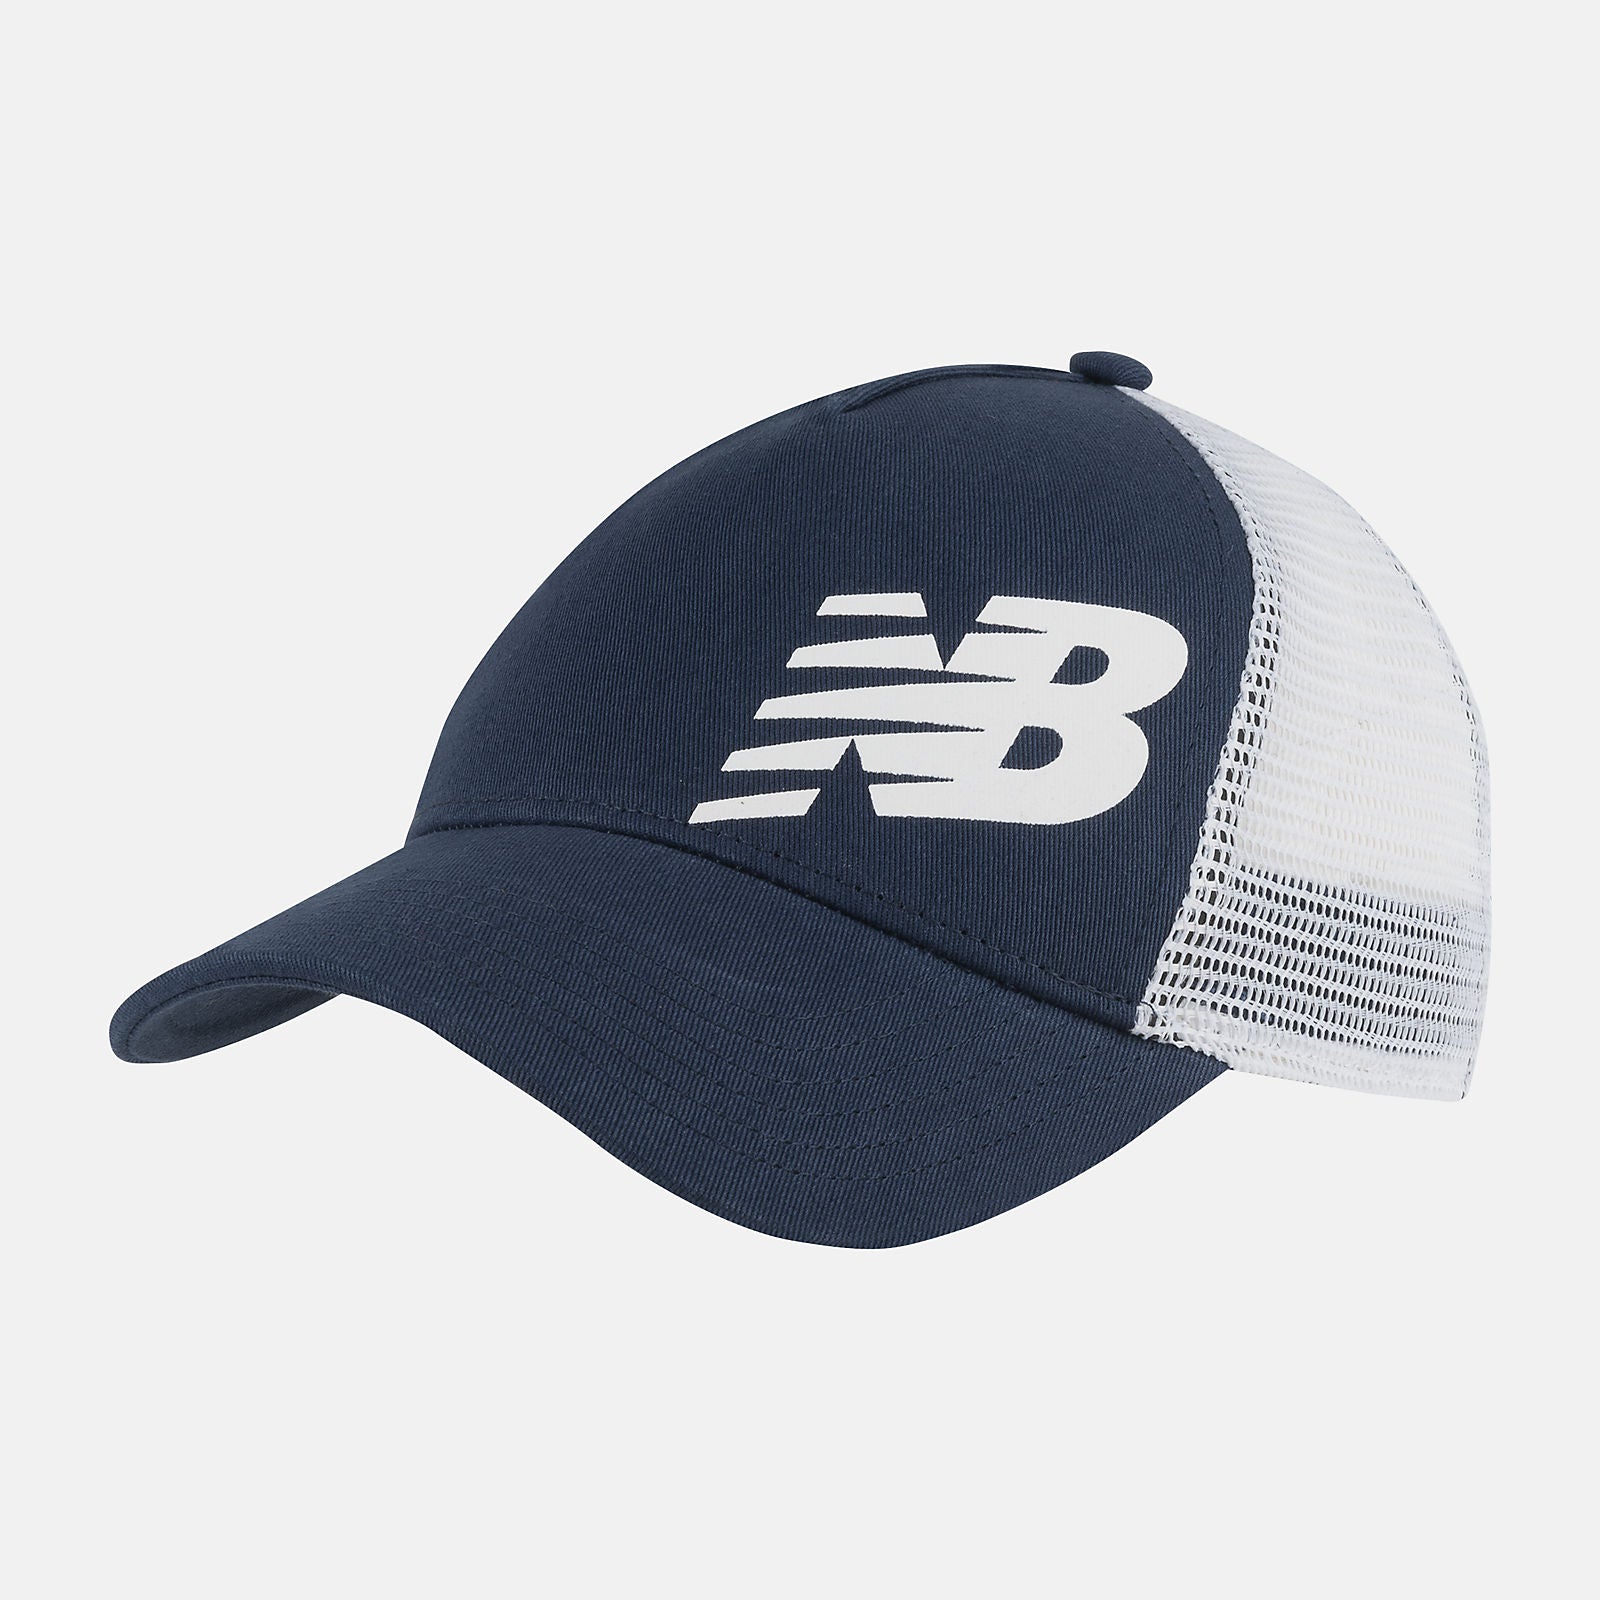 NEW BALANCE Kid&#39;s Trucker Hat in Navy LAH31008 O/S NB NAVY FROM EIGHTYWINGOLD - OFFICIAL BRAND PARTNER